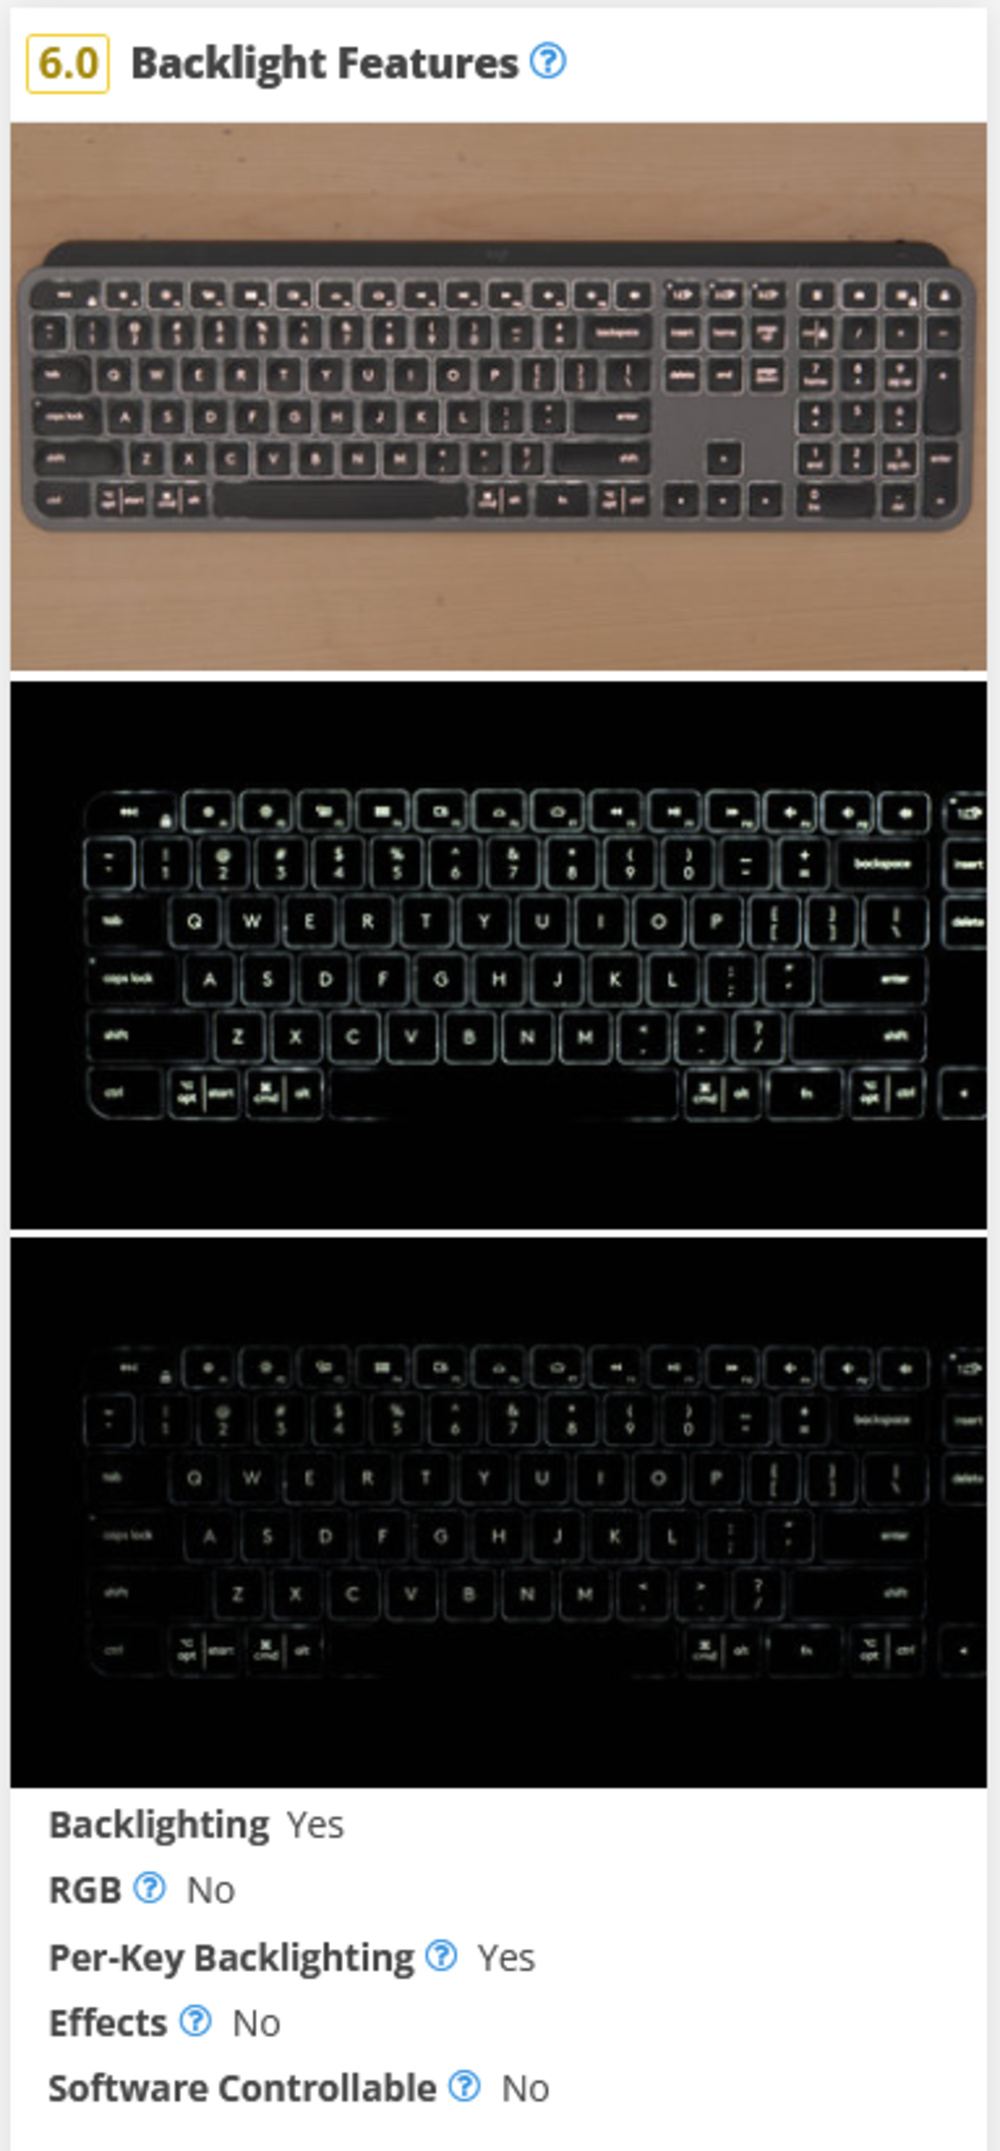 An example of our new Backlight Features test results for the Logitech MX Keys